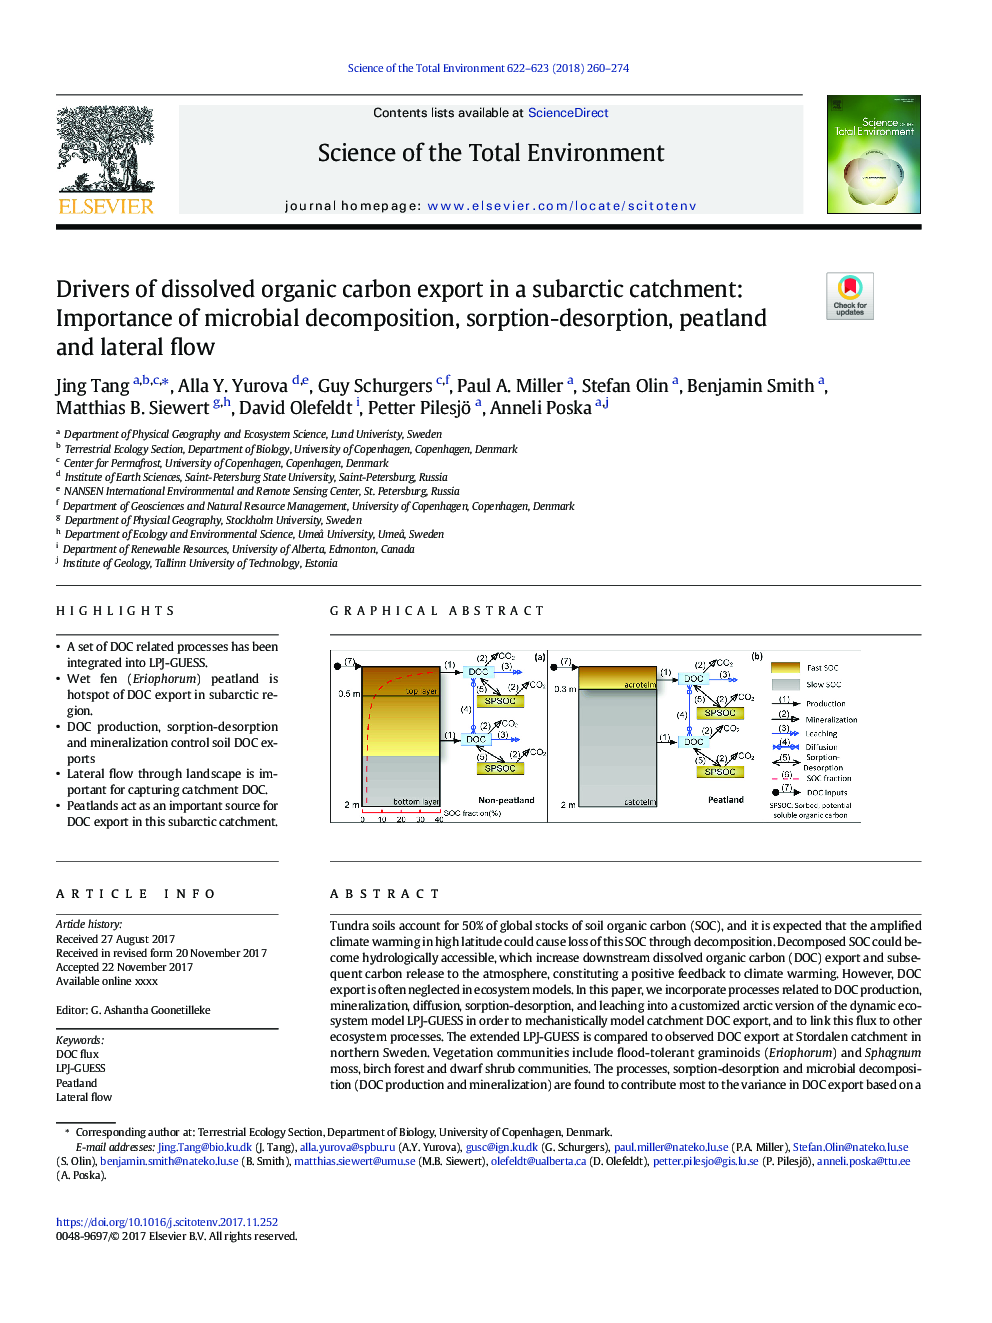 Drivers of dissolved organic carbon export in a subarctic catchment: Importance of microbial decomposition, sorption-desorption, peatland and lateral flow